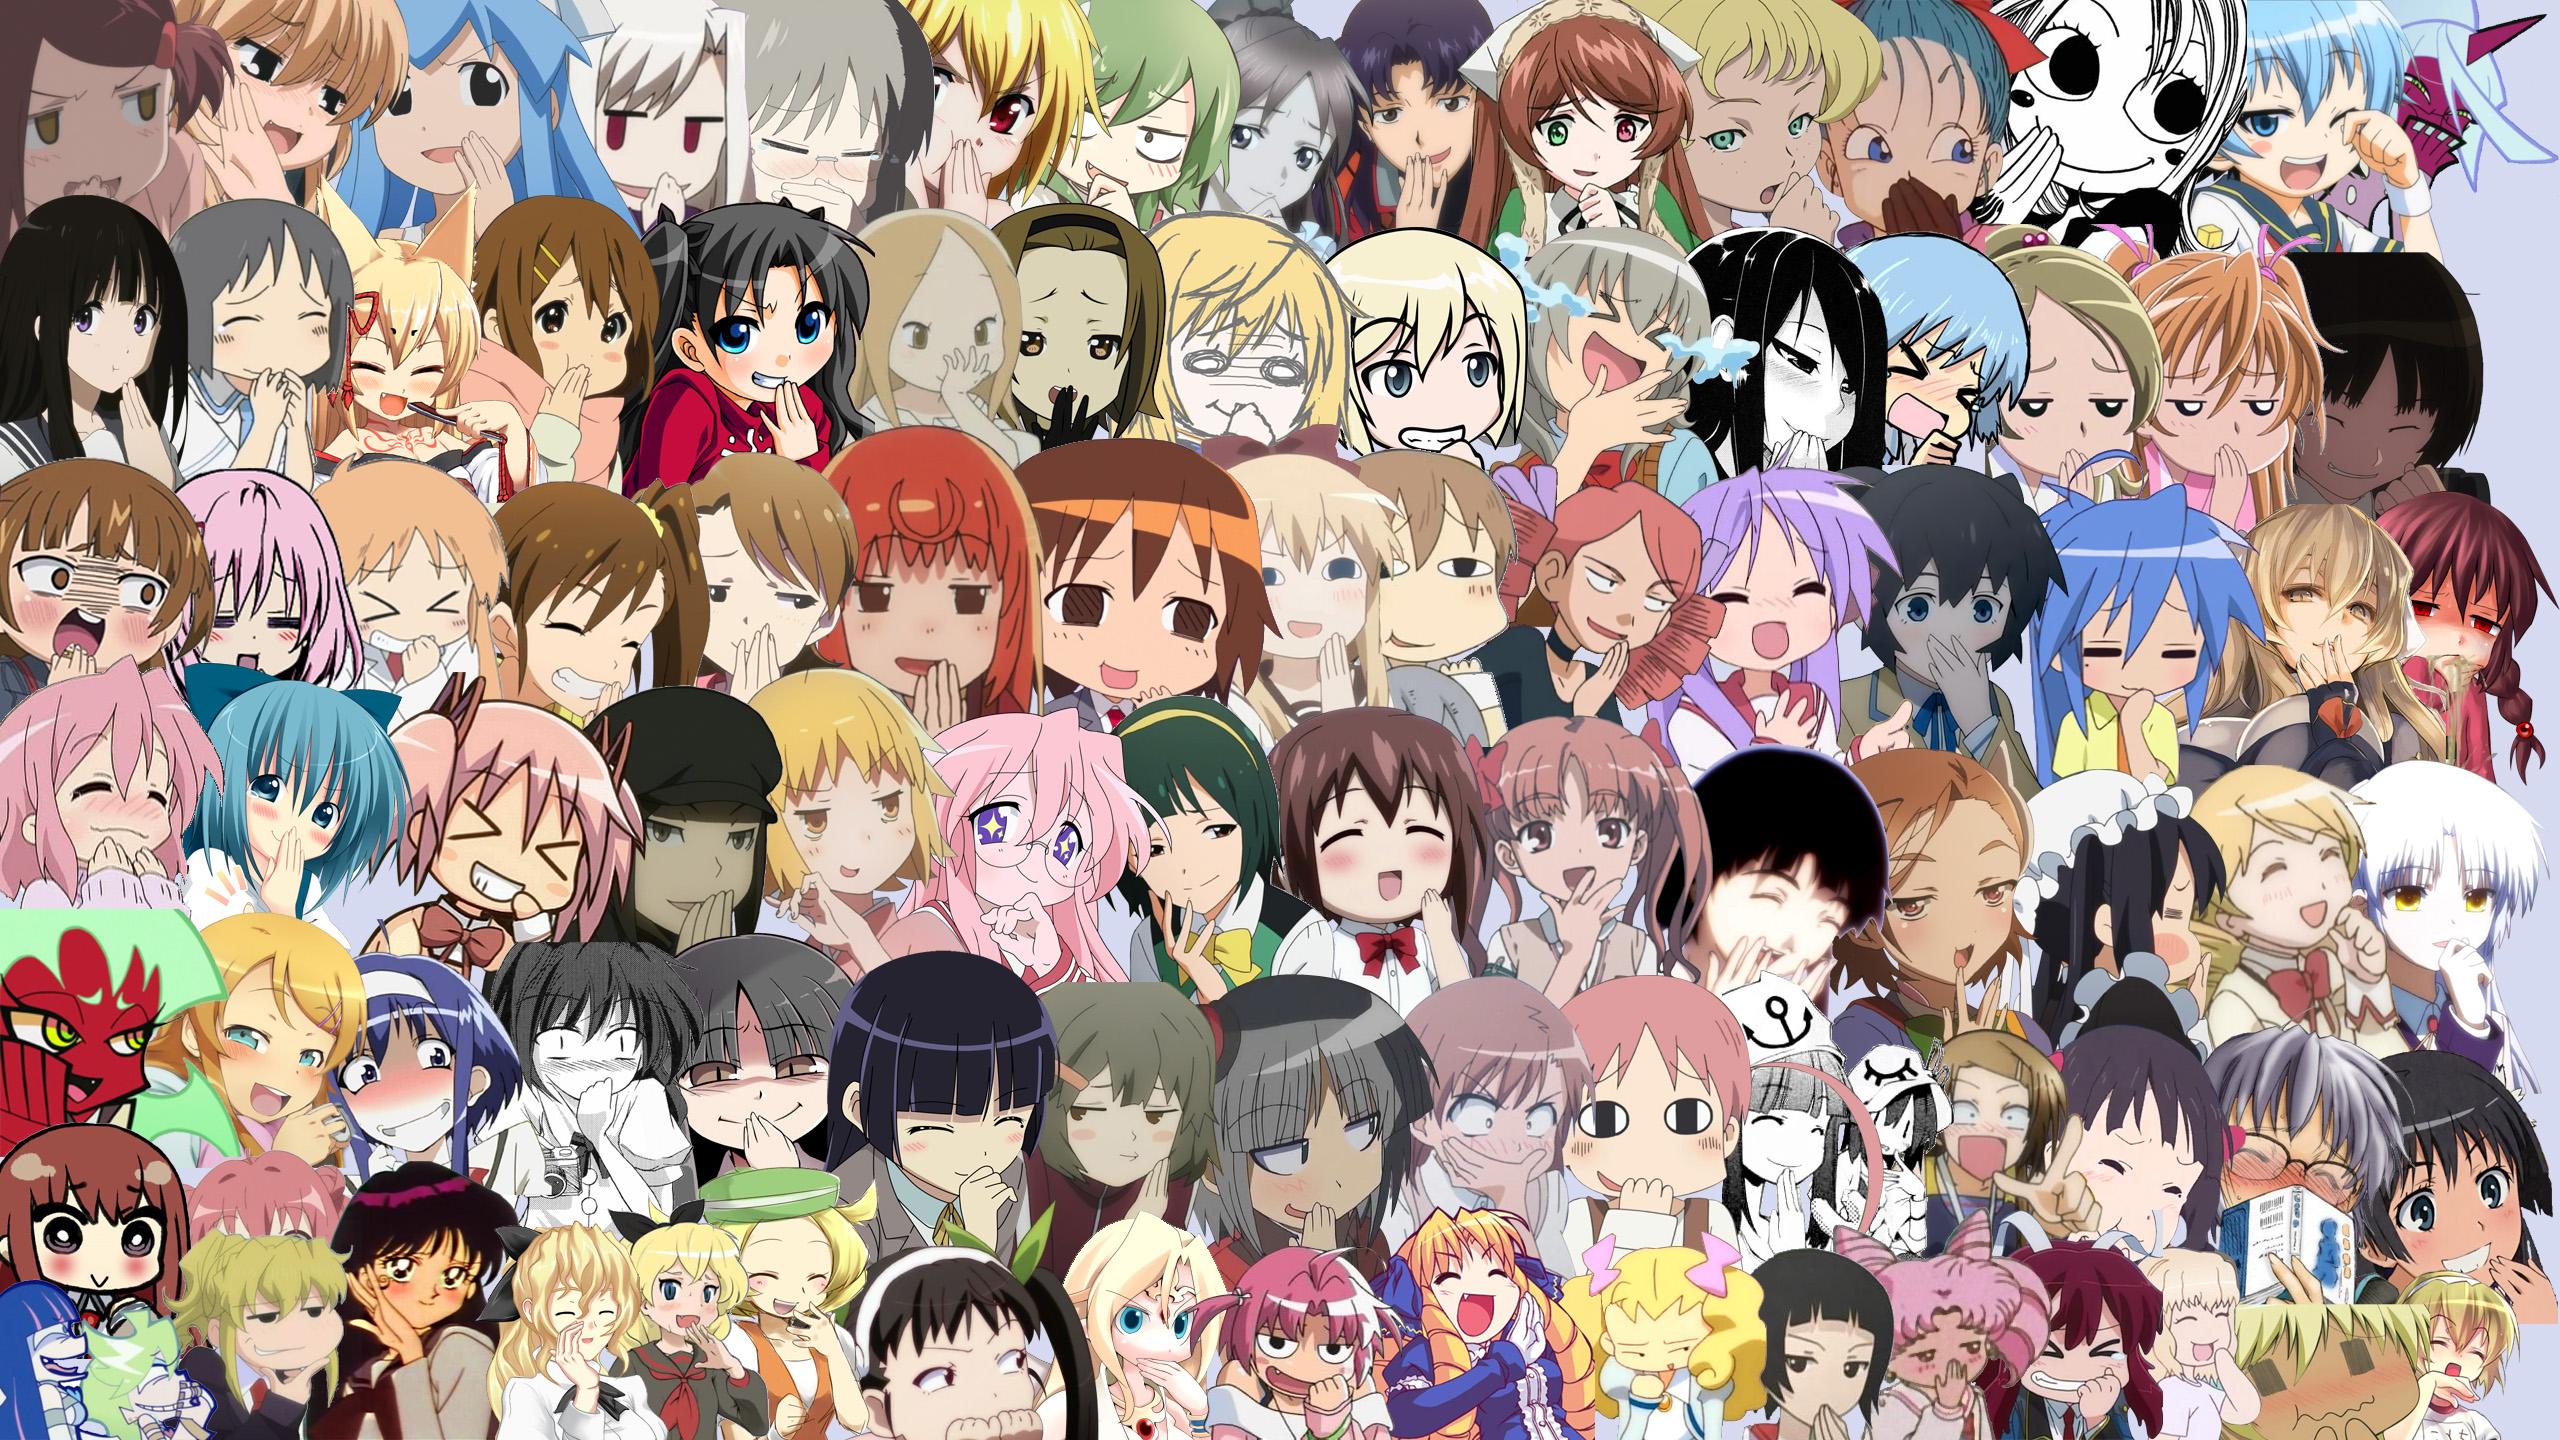 Pin on Anime Collage